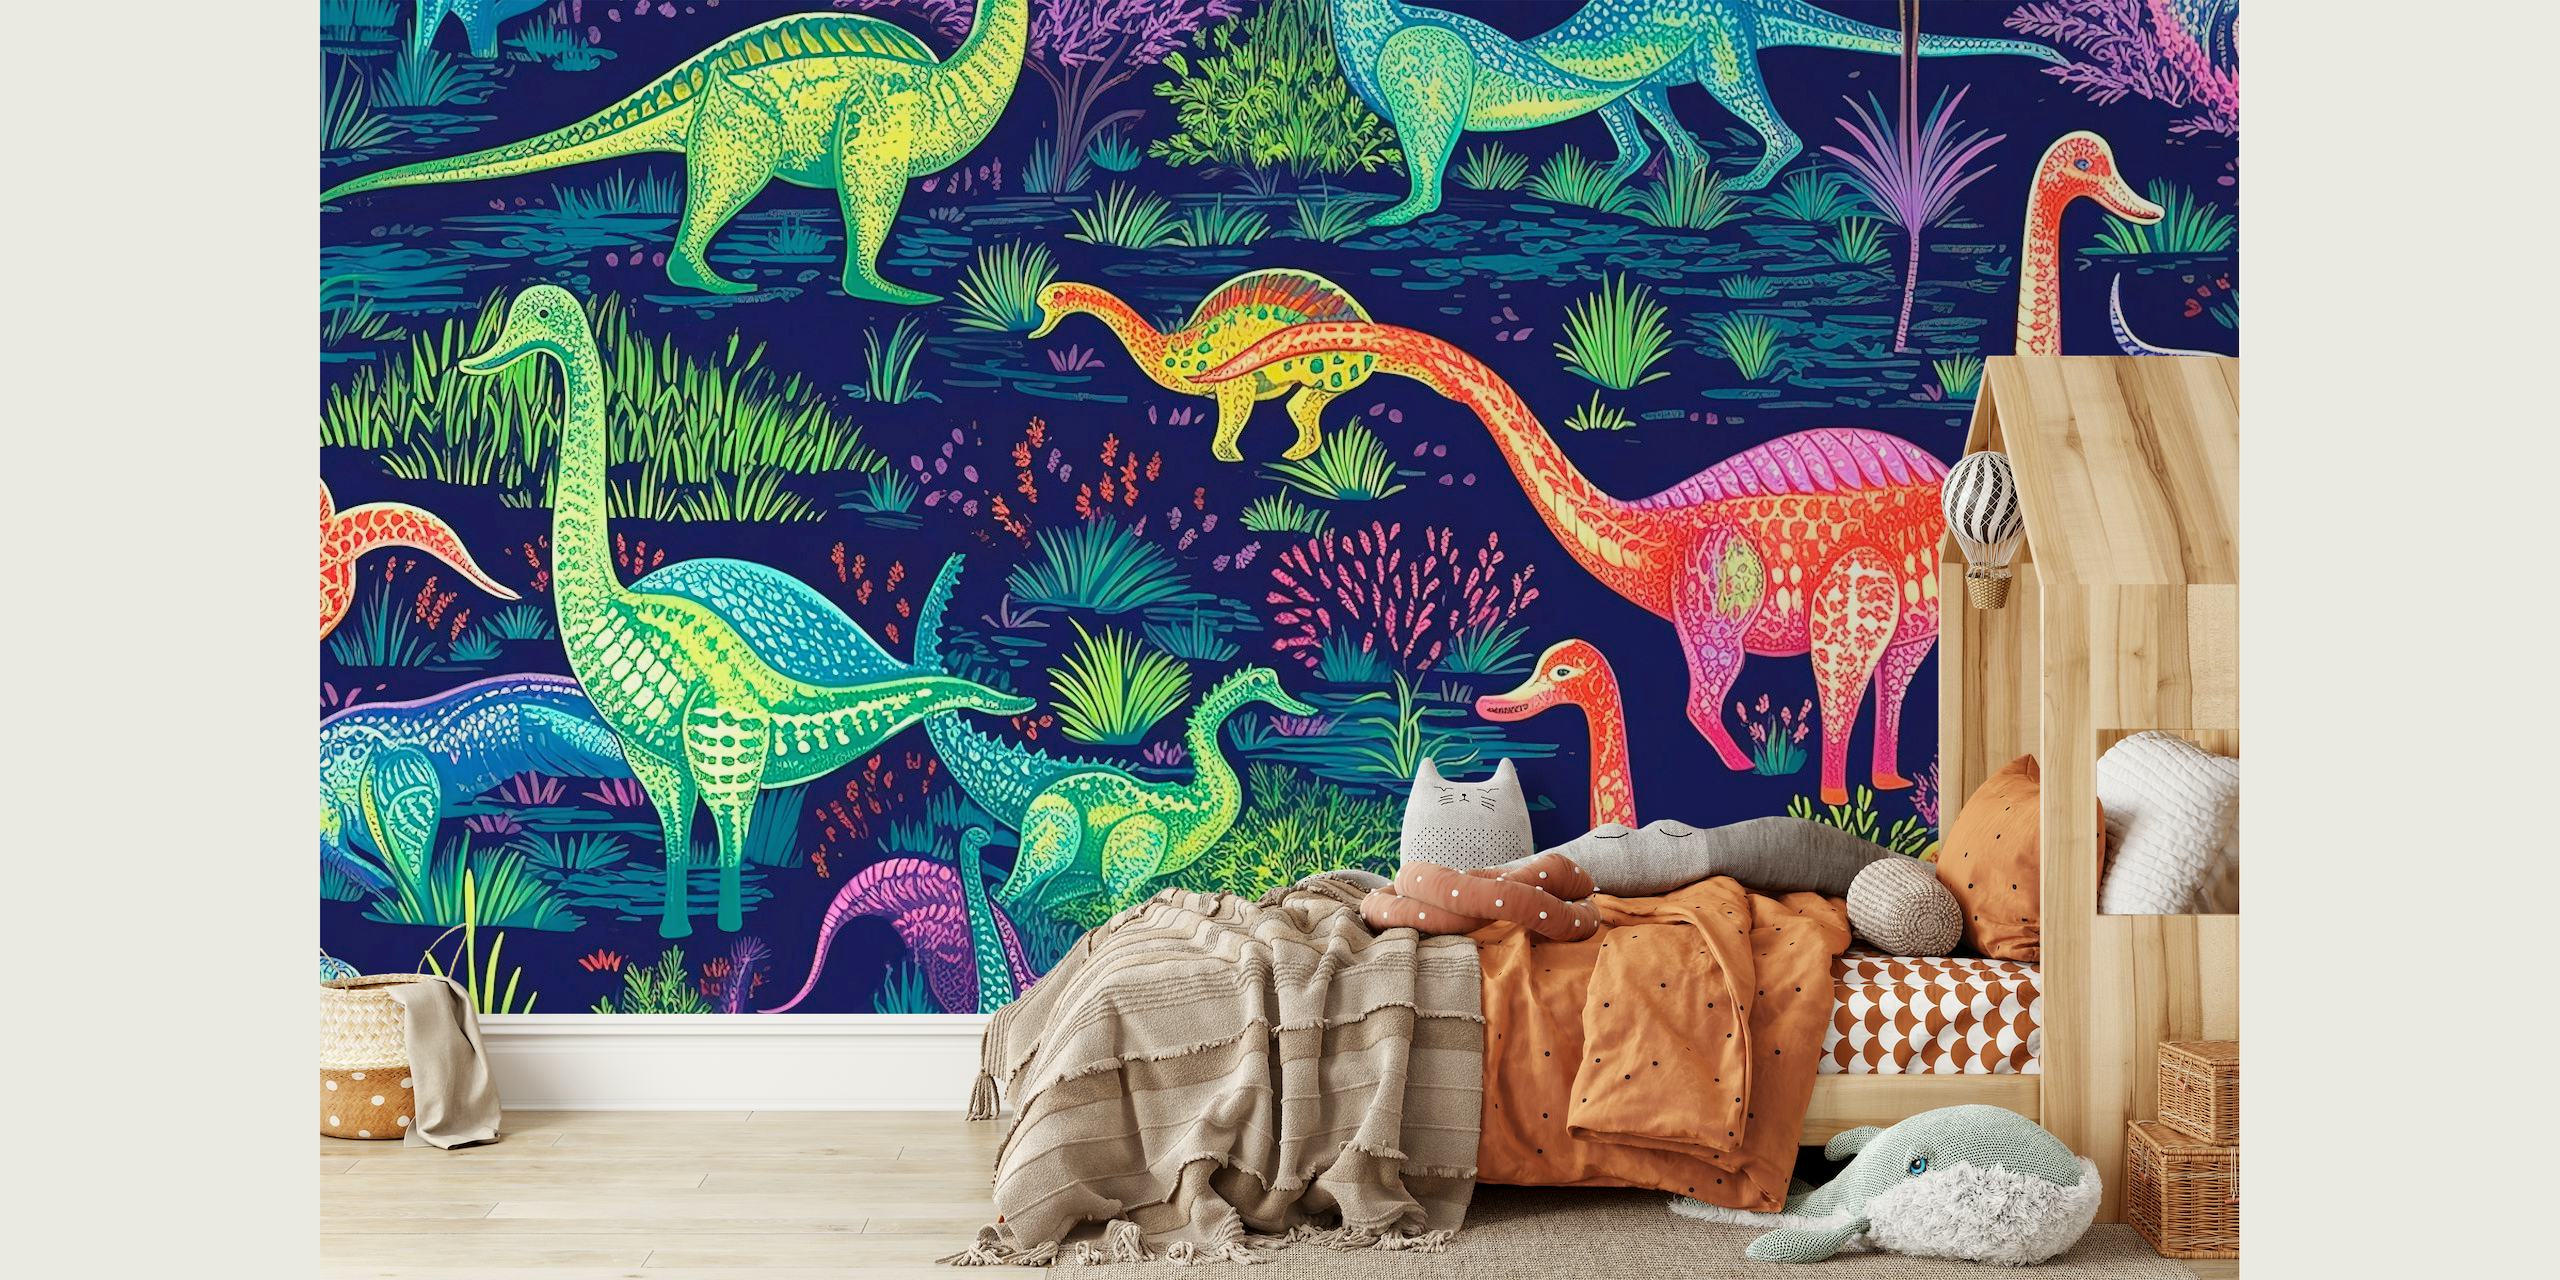 Colorful wall mural featuring animated dinosaurs in fluorescent colors set against a prehistoric background